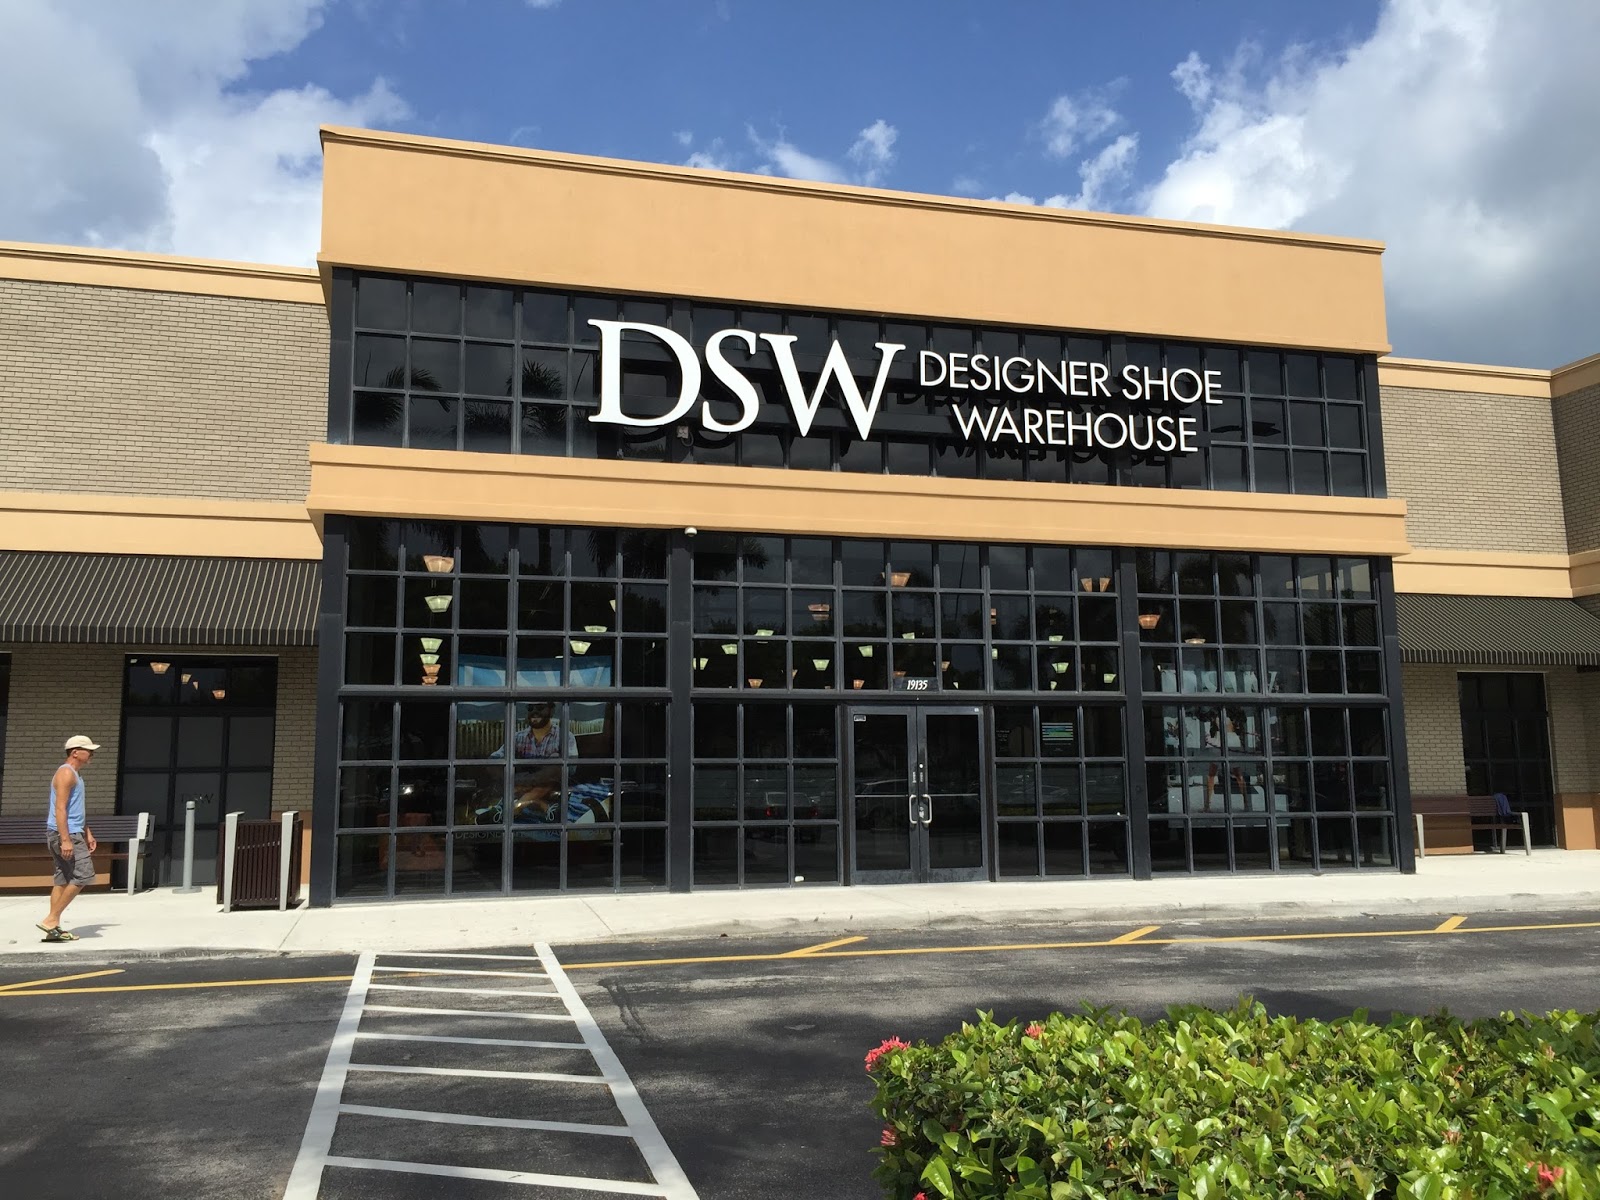 ... up and receive from dsw special email offers and promotions or become